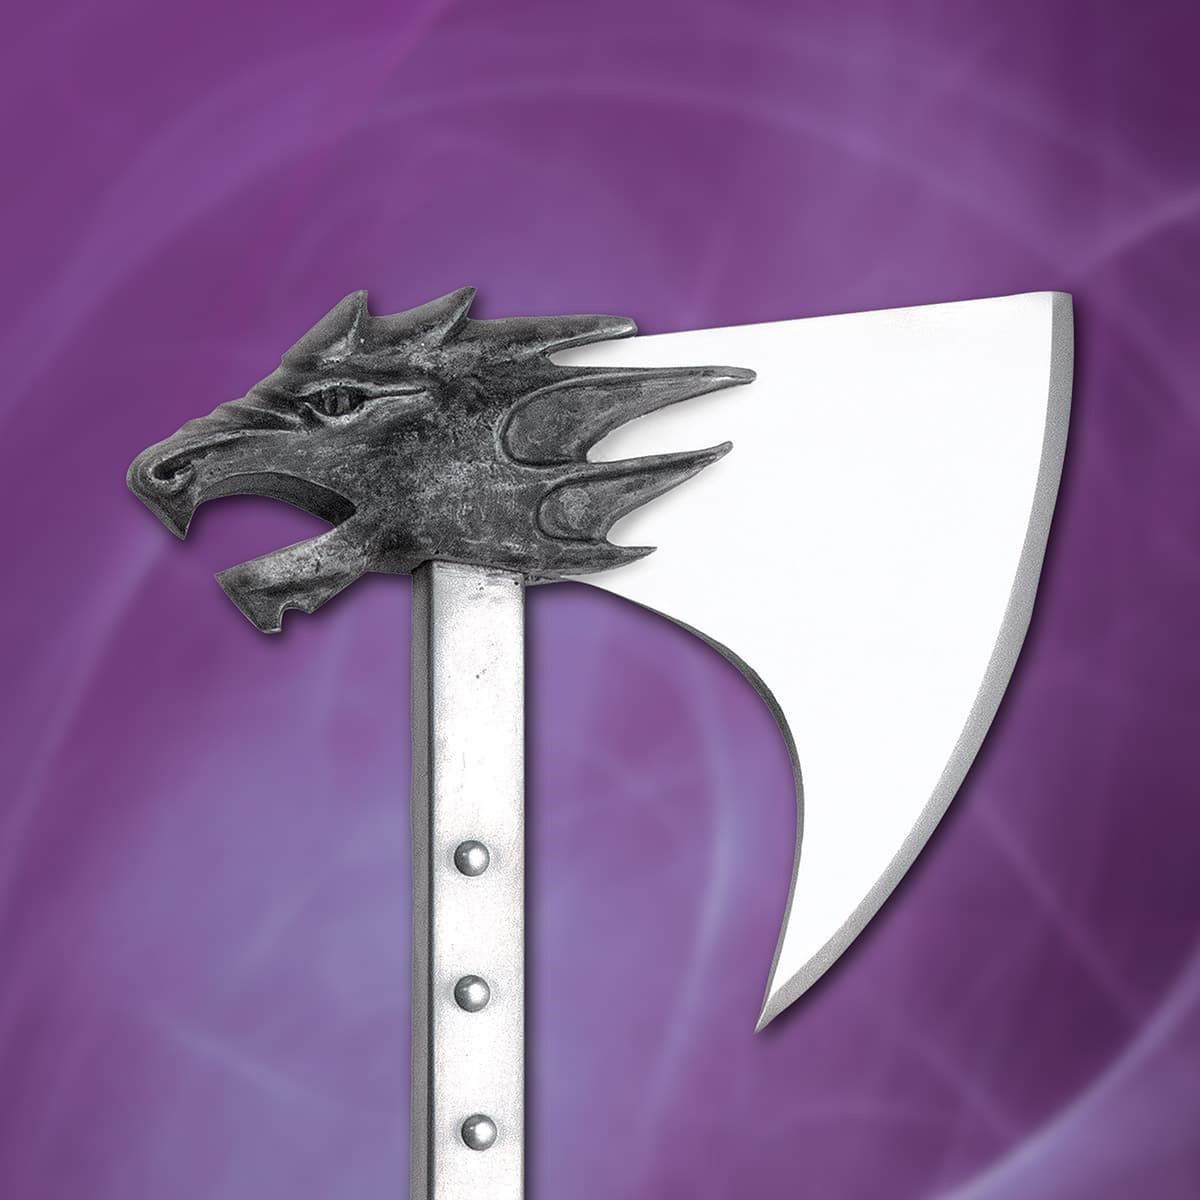 The Beast Axe has a steel shaft and a dragon head on the back of the sharpened high carbon steel axe head